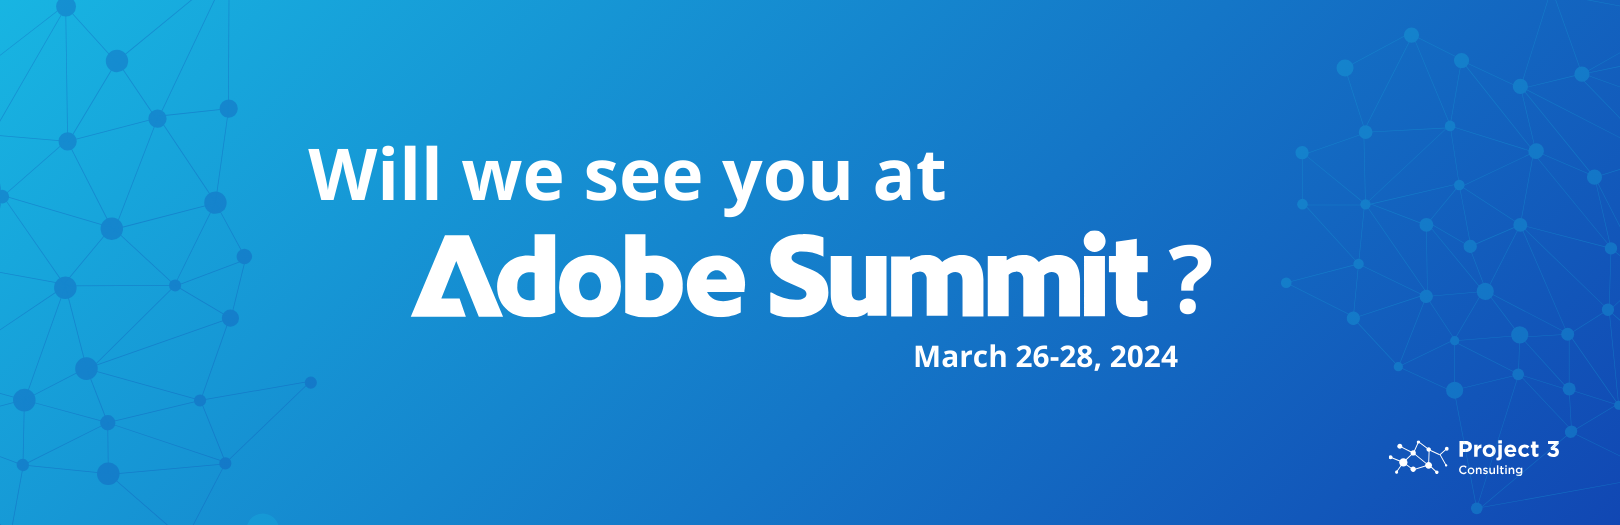 Project 3 Consulting at Adobe Summit 2024